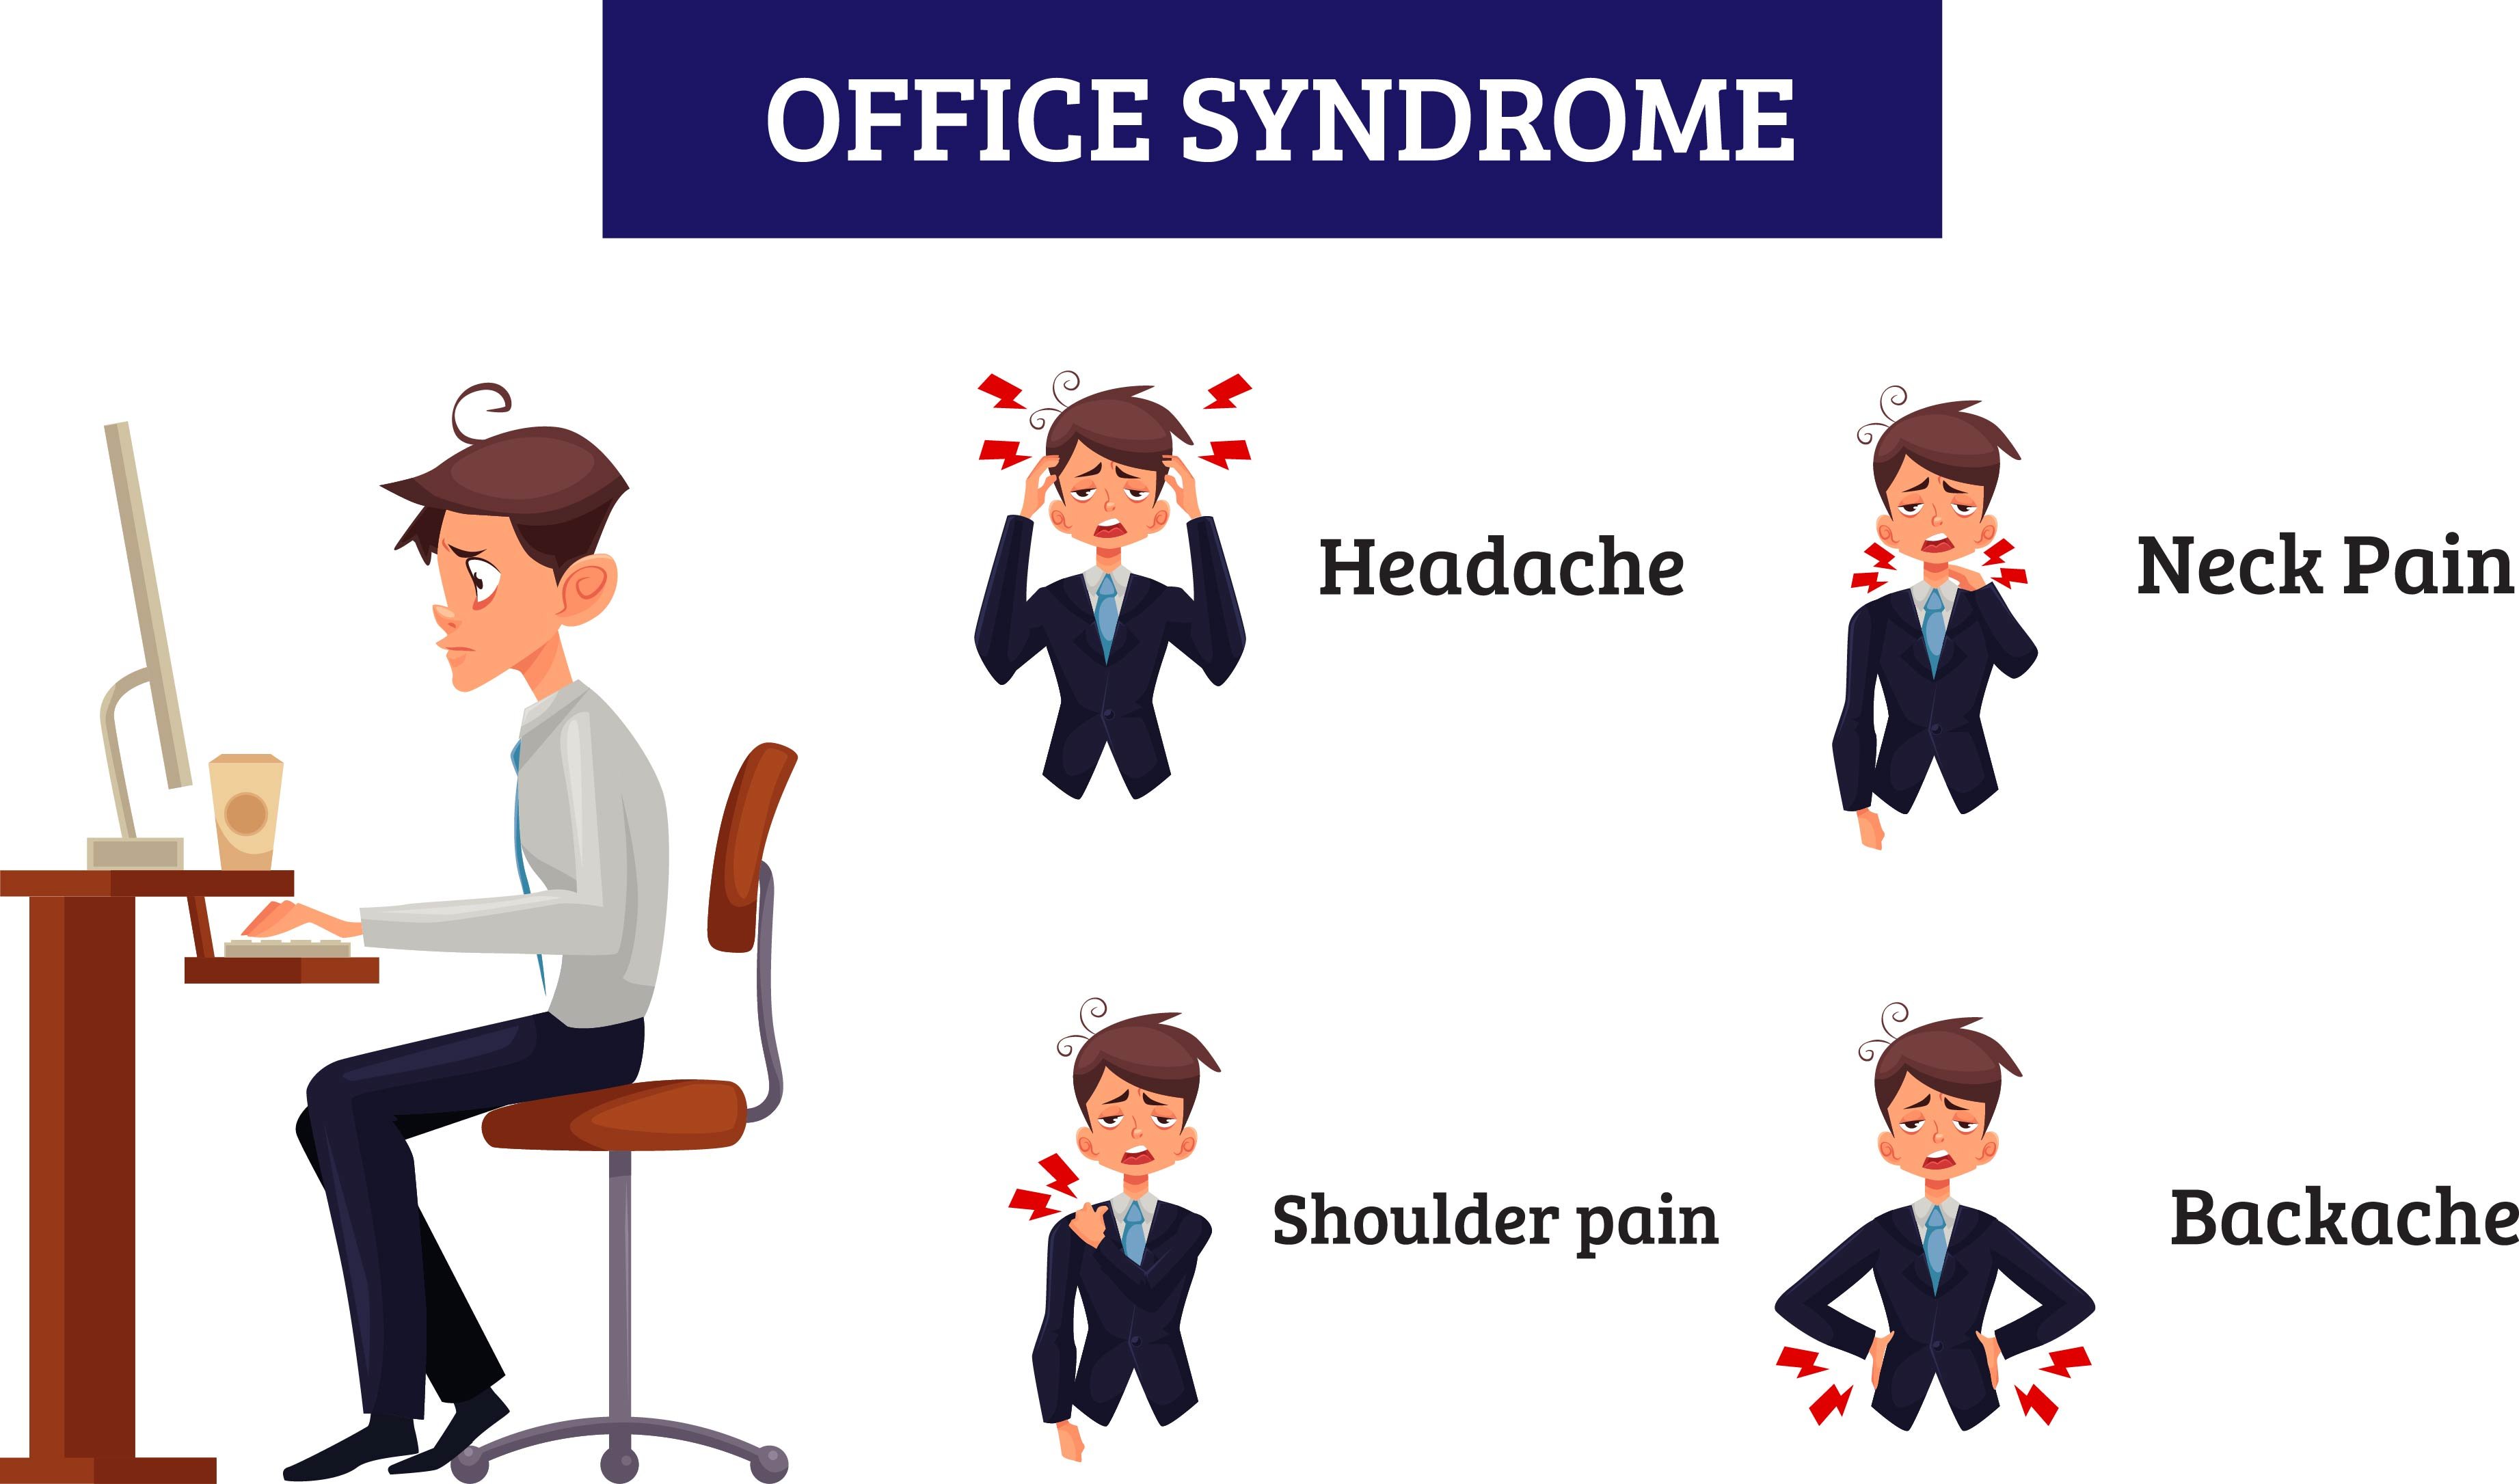 oFFICE_SYNDROME.jpg